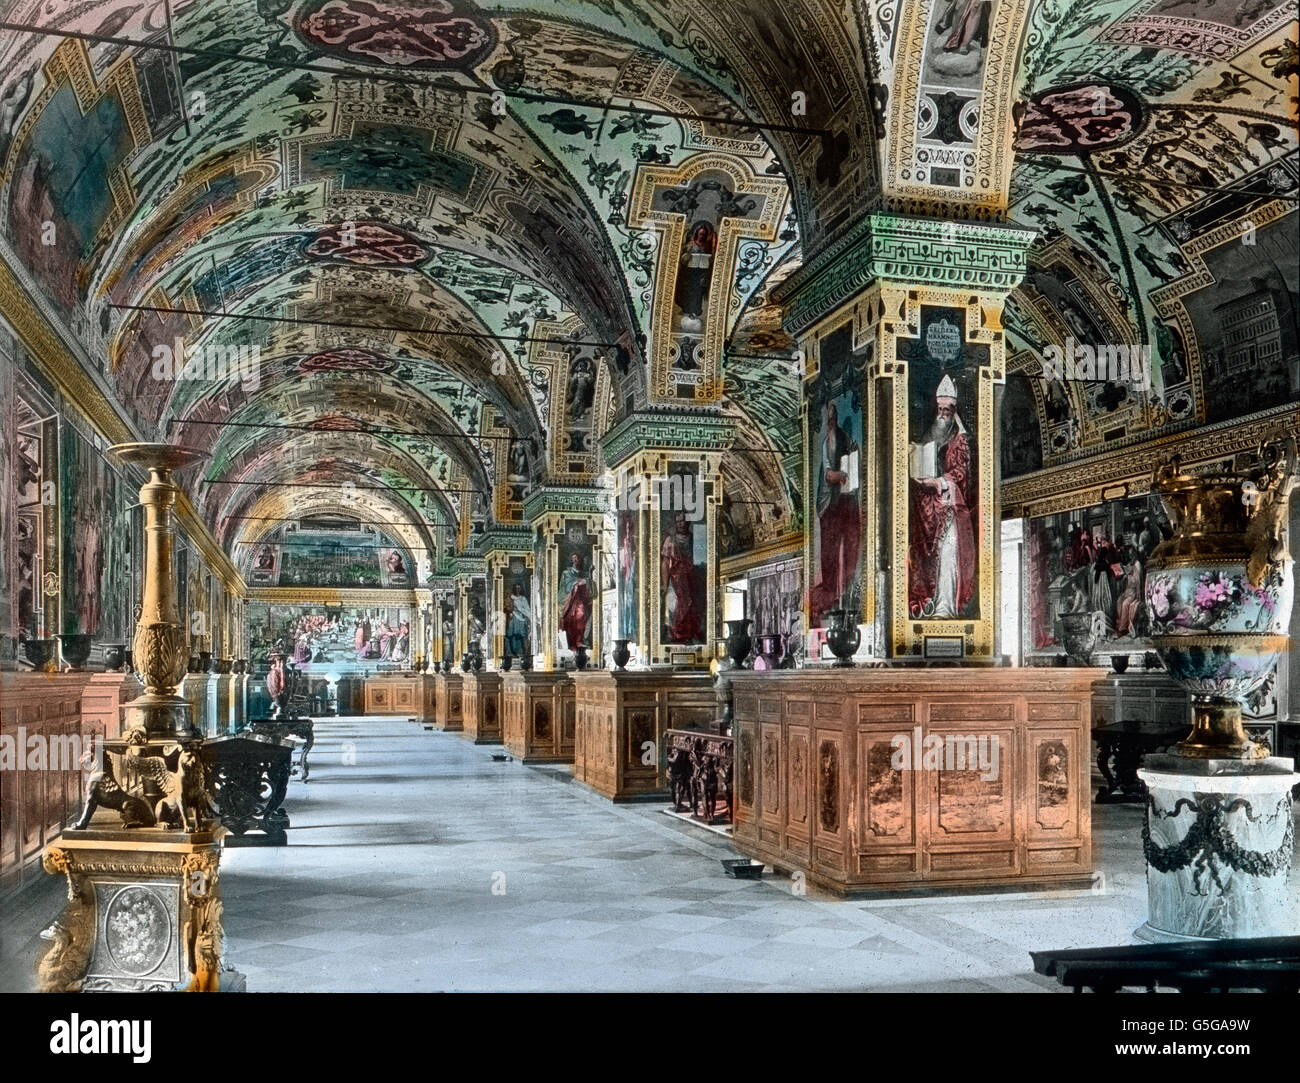 Bibliothek im Vatikan. The Vatican library. books, archive, archives, pillars, architecture, shelf, collection, Rome, Europe, Italy, Rome, history, historical, 1910s, 1920s, 20th century, archive, Carl Simon, hand-coloured glass slide Stock Photo